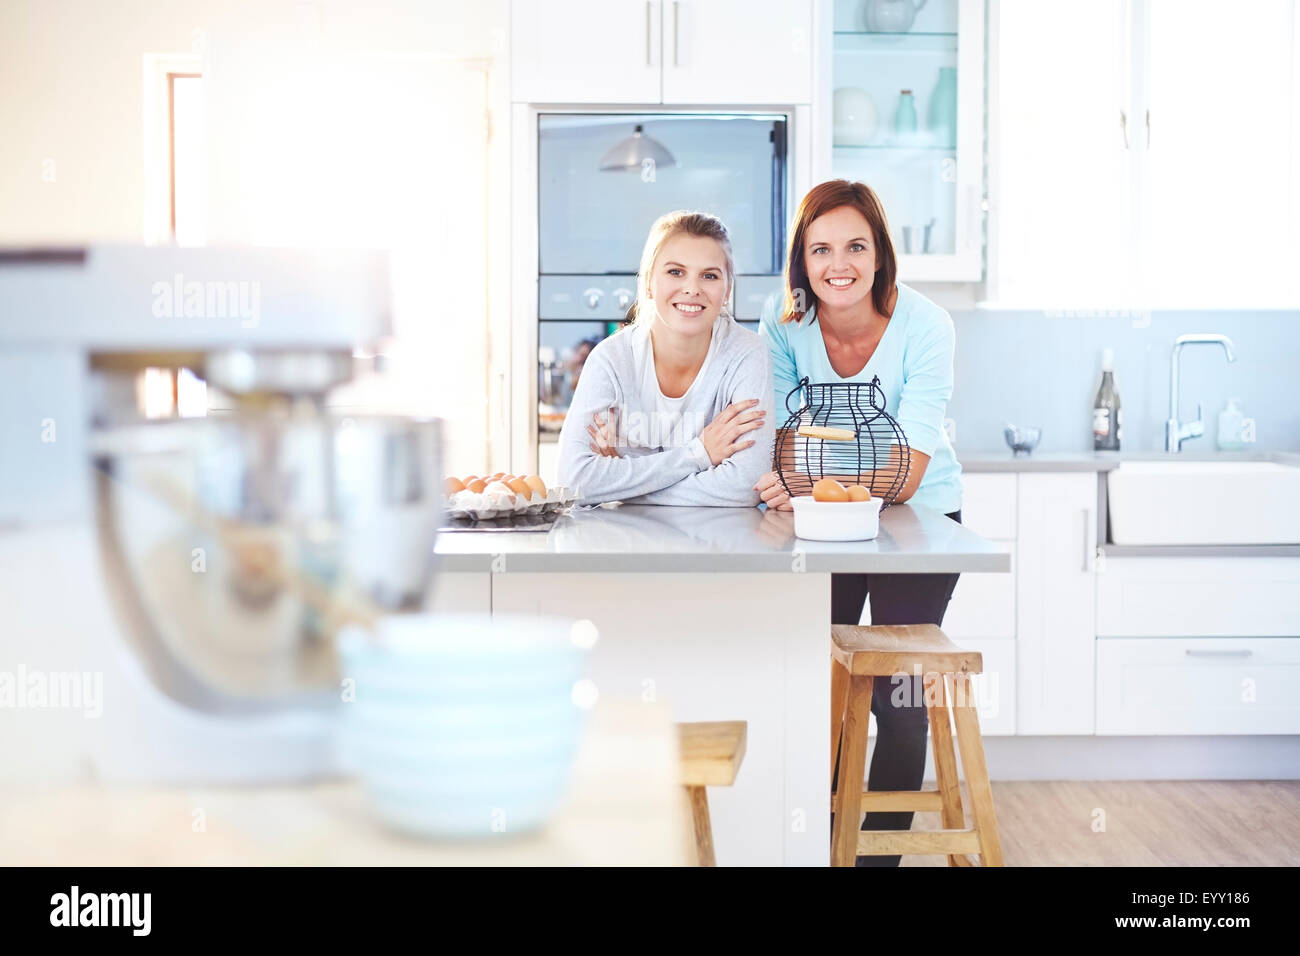 Portrait of smiling women leaning on kitchen counter Banque D'Images